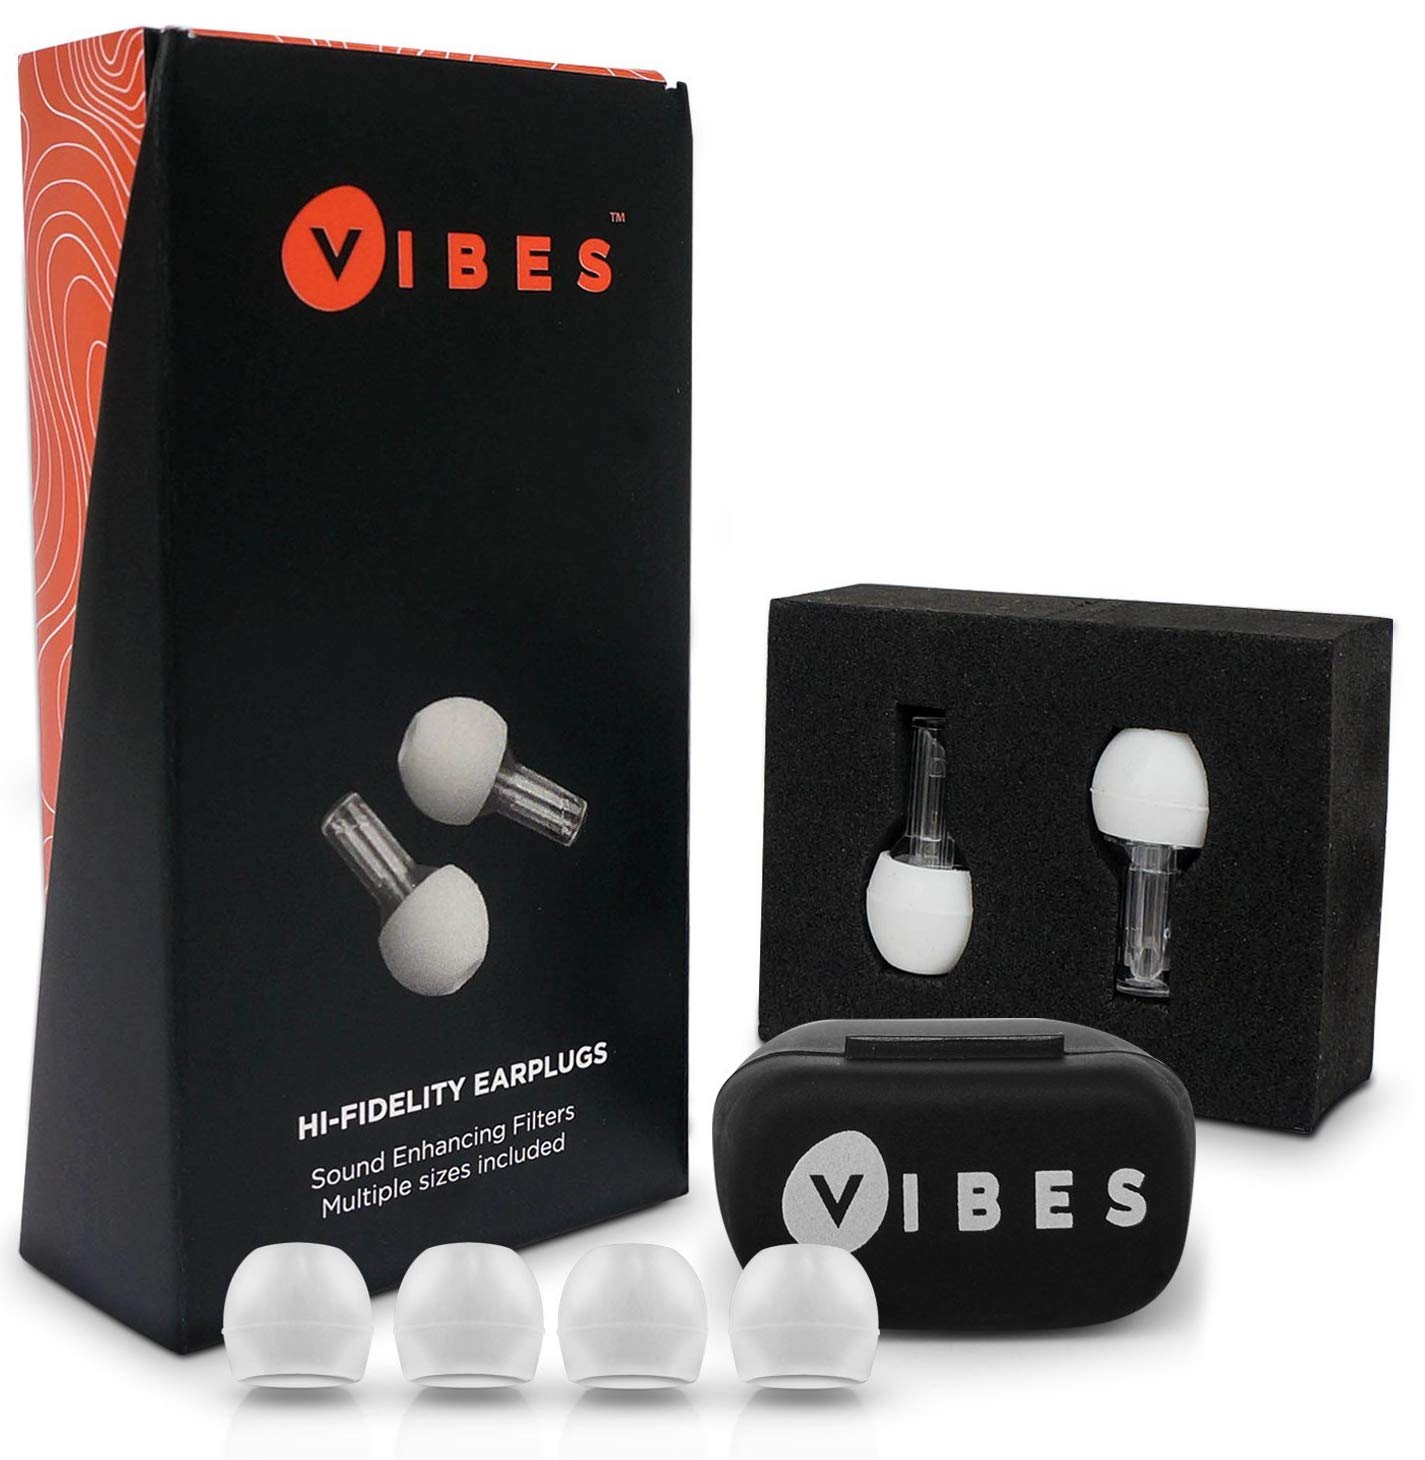 Vibes earplugs can help prevent an autism meltdown.